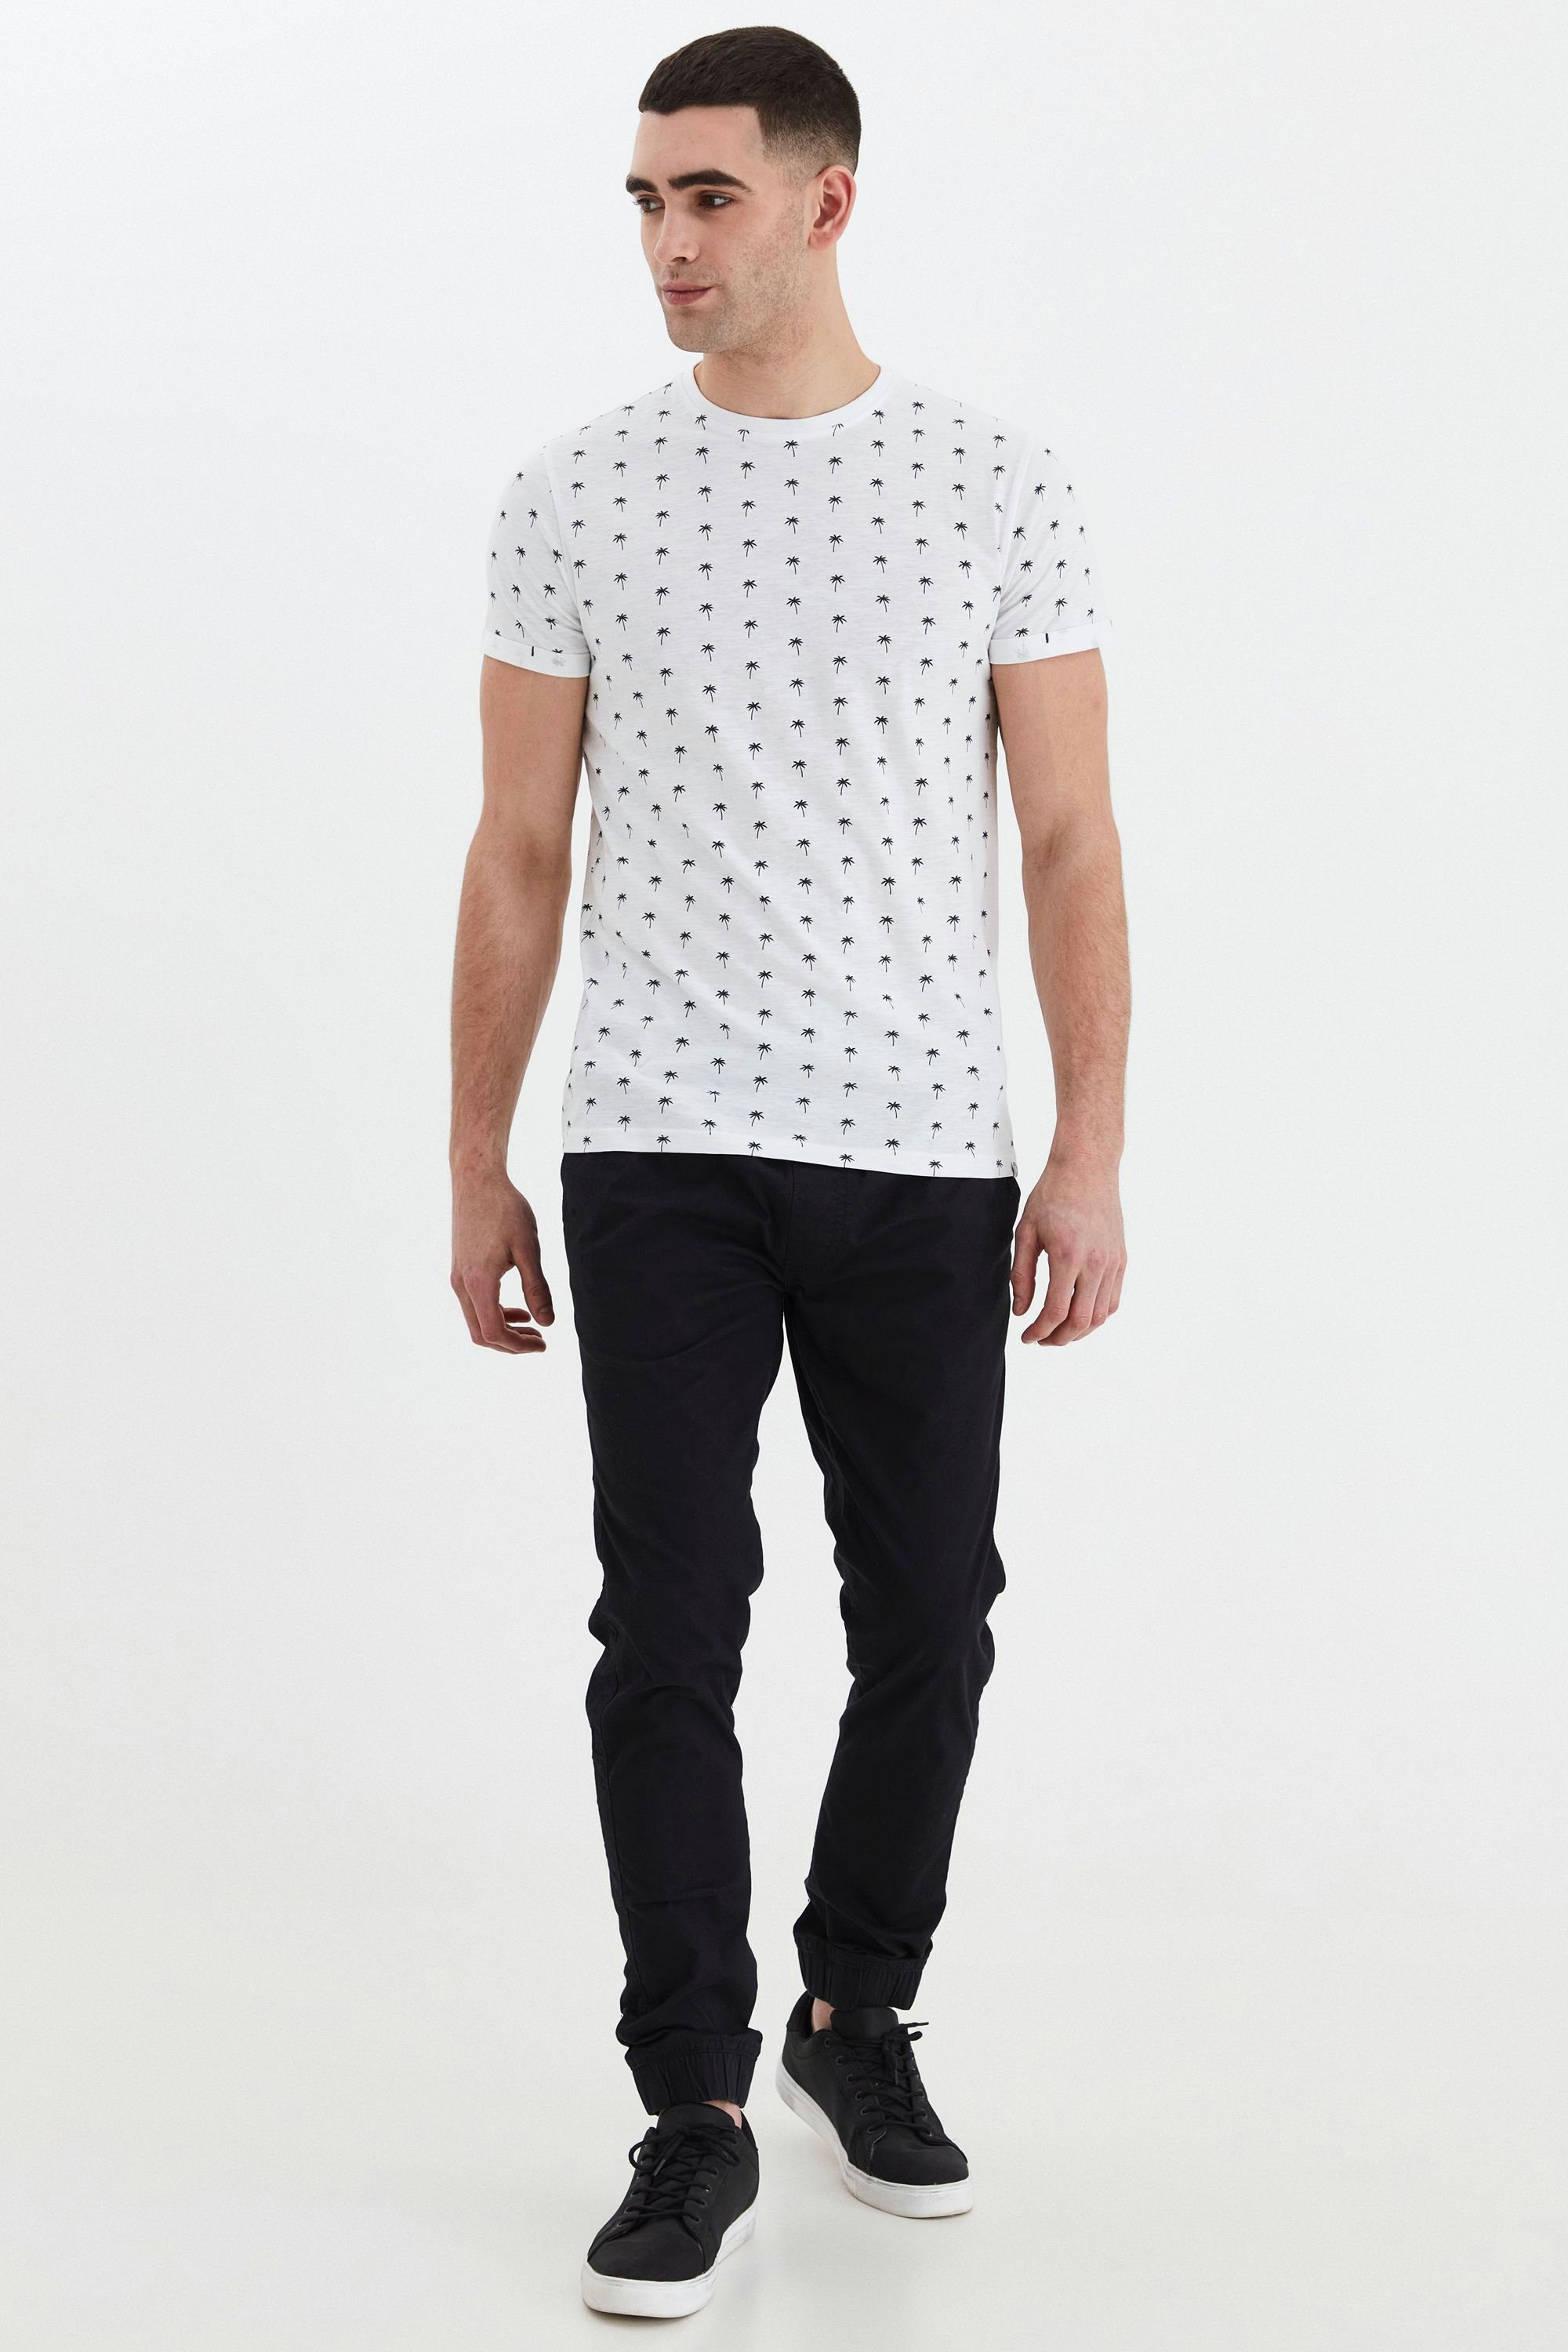 !Solid (110601) White T-Shirt SDJarvis T-Shirt